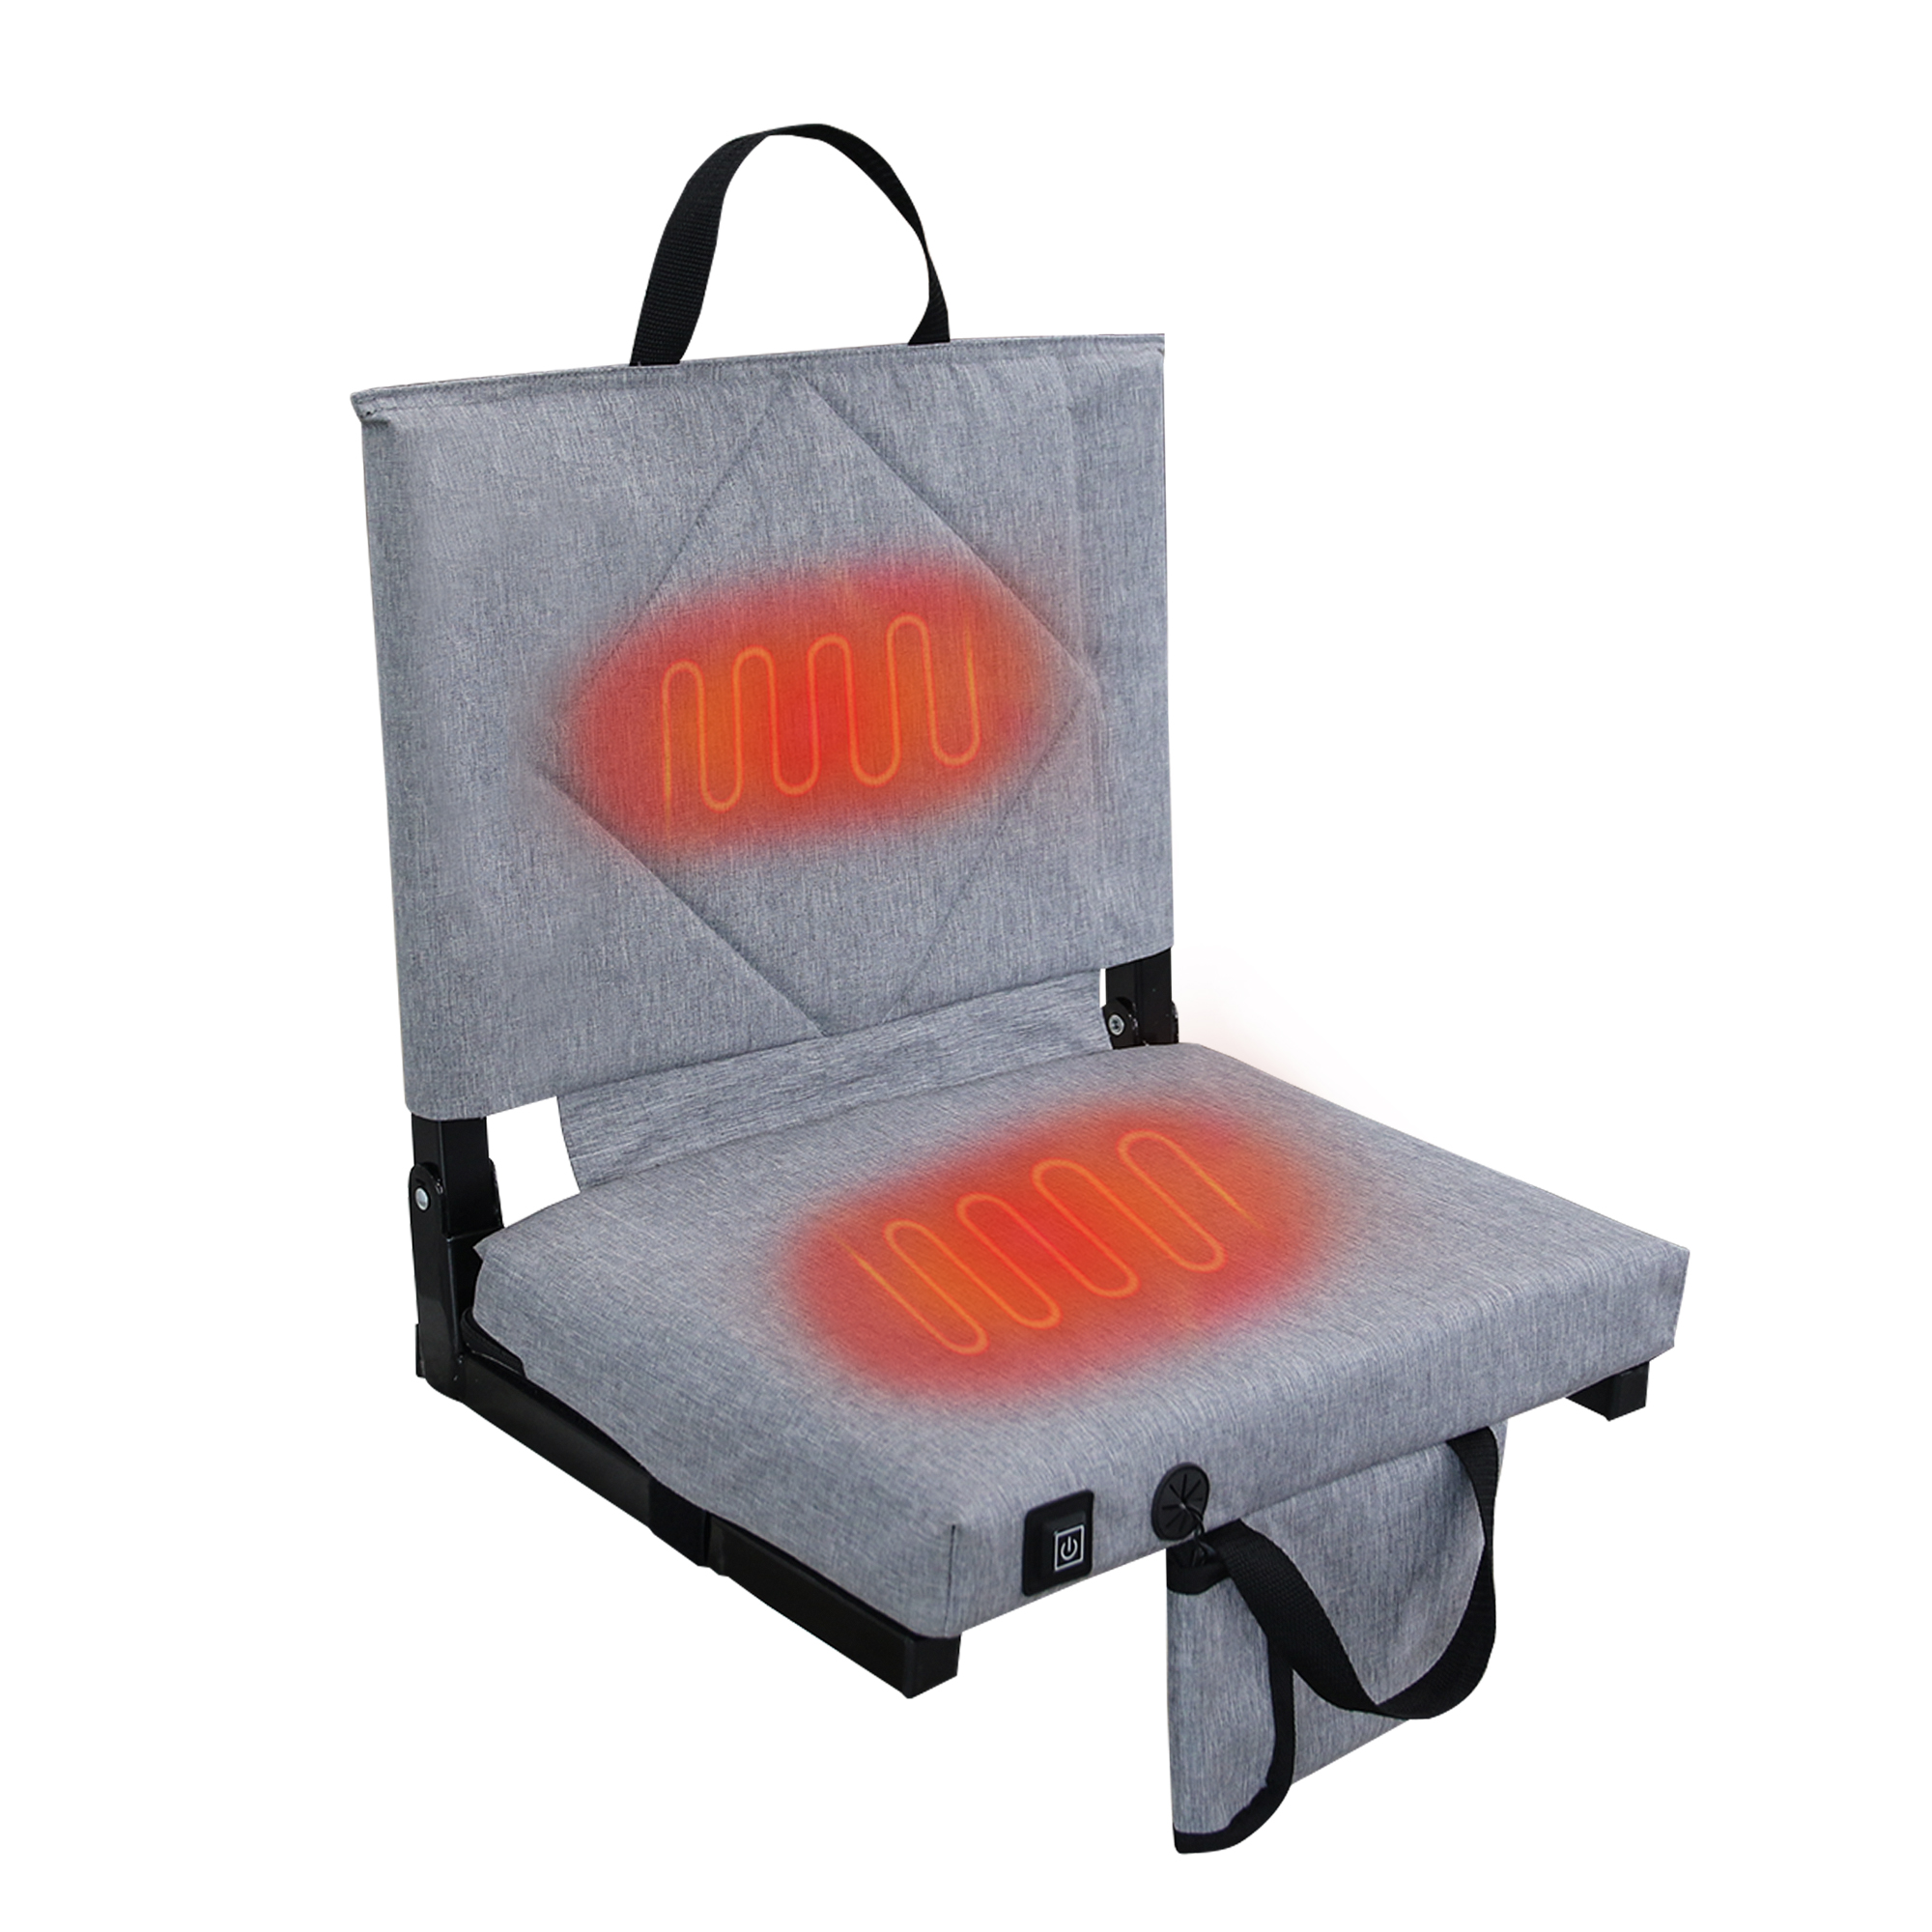 Heated Steel Seat Cushion with Back Support MTECC017